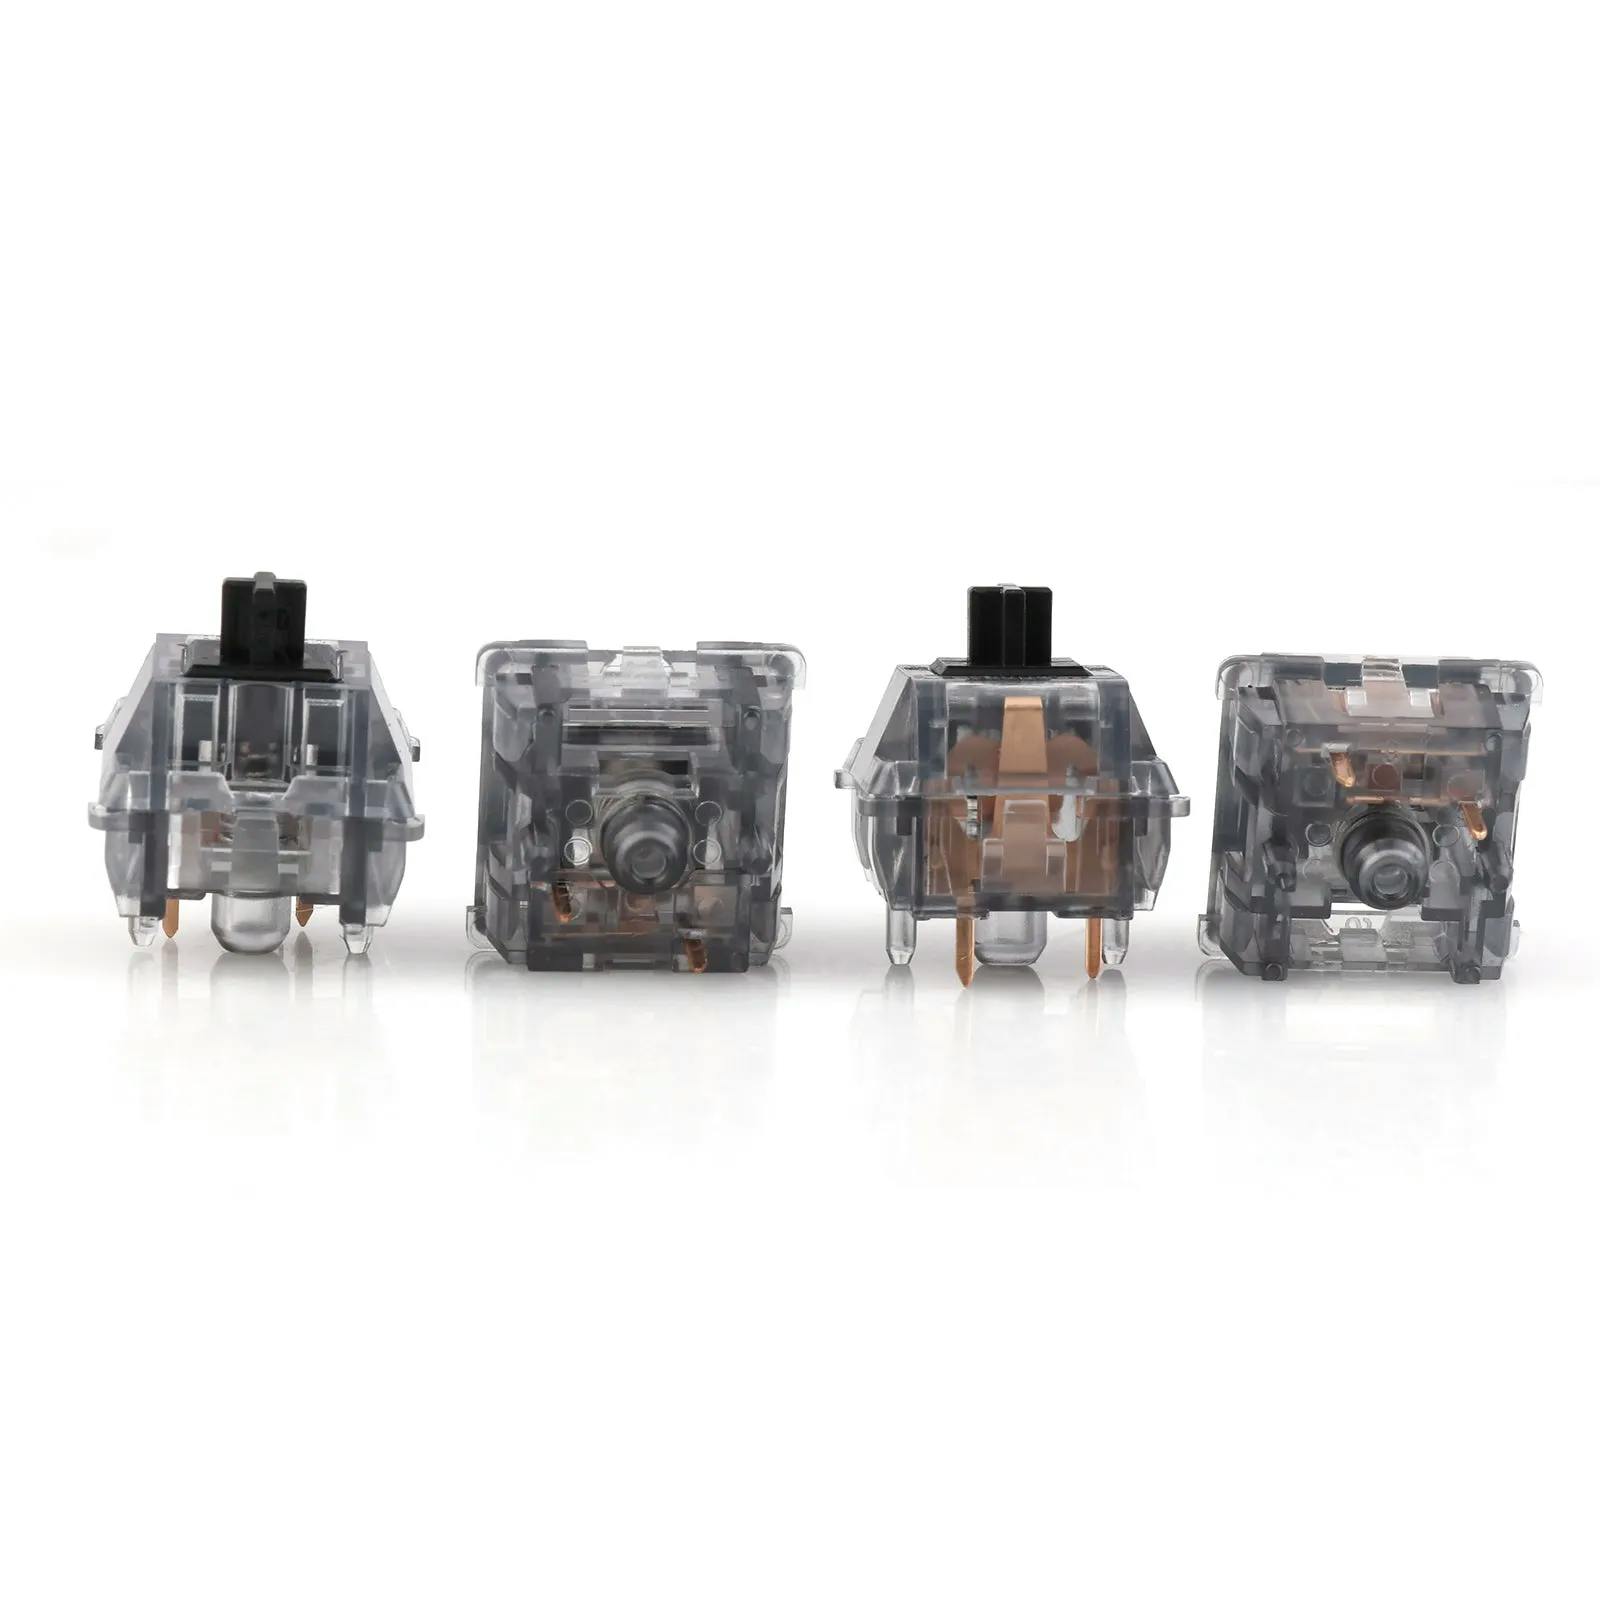 Image for EPOMAKER Shadow Black Switch Set